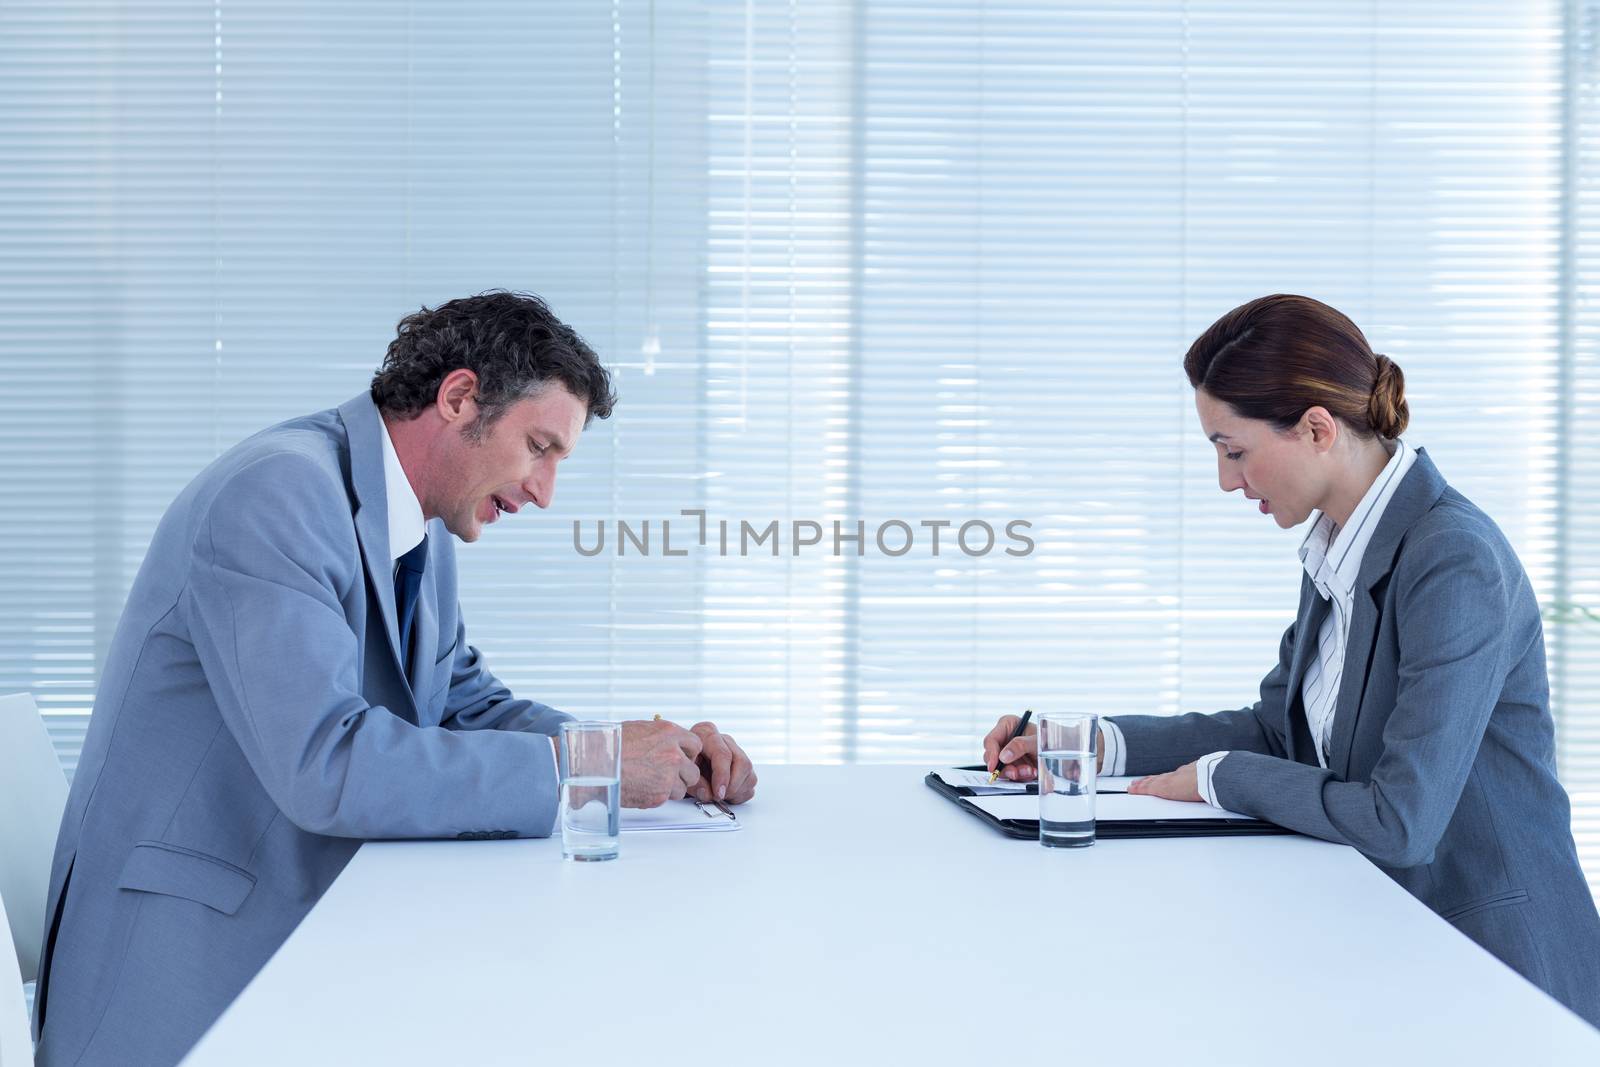 Business people brainstorming together in an office